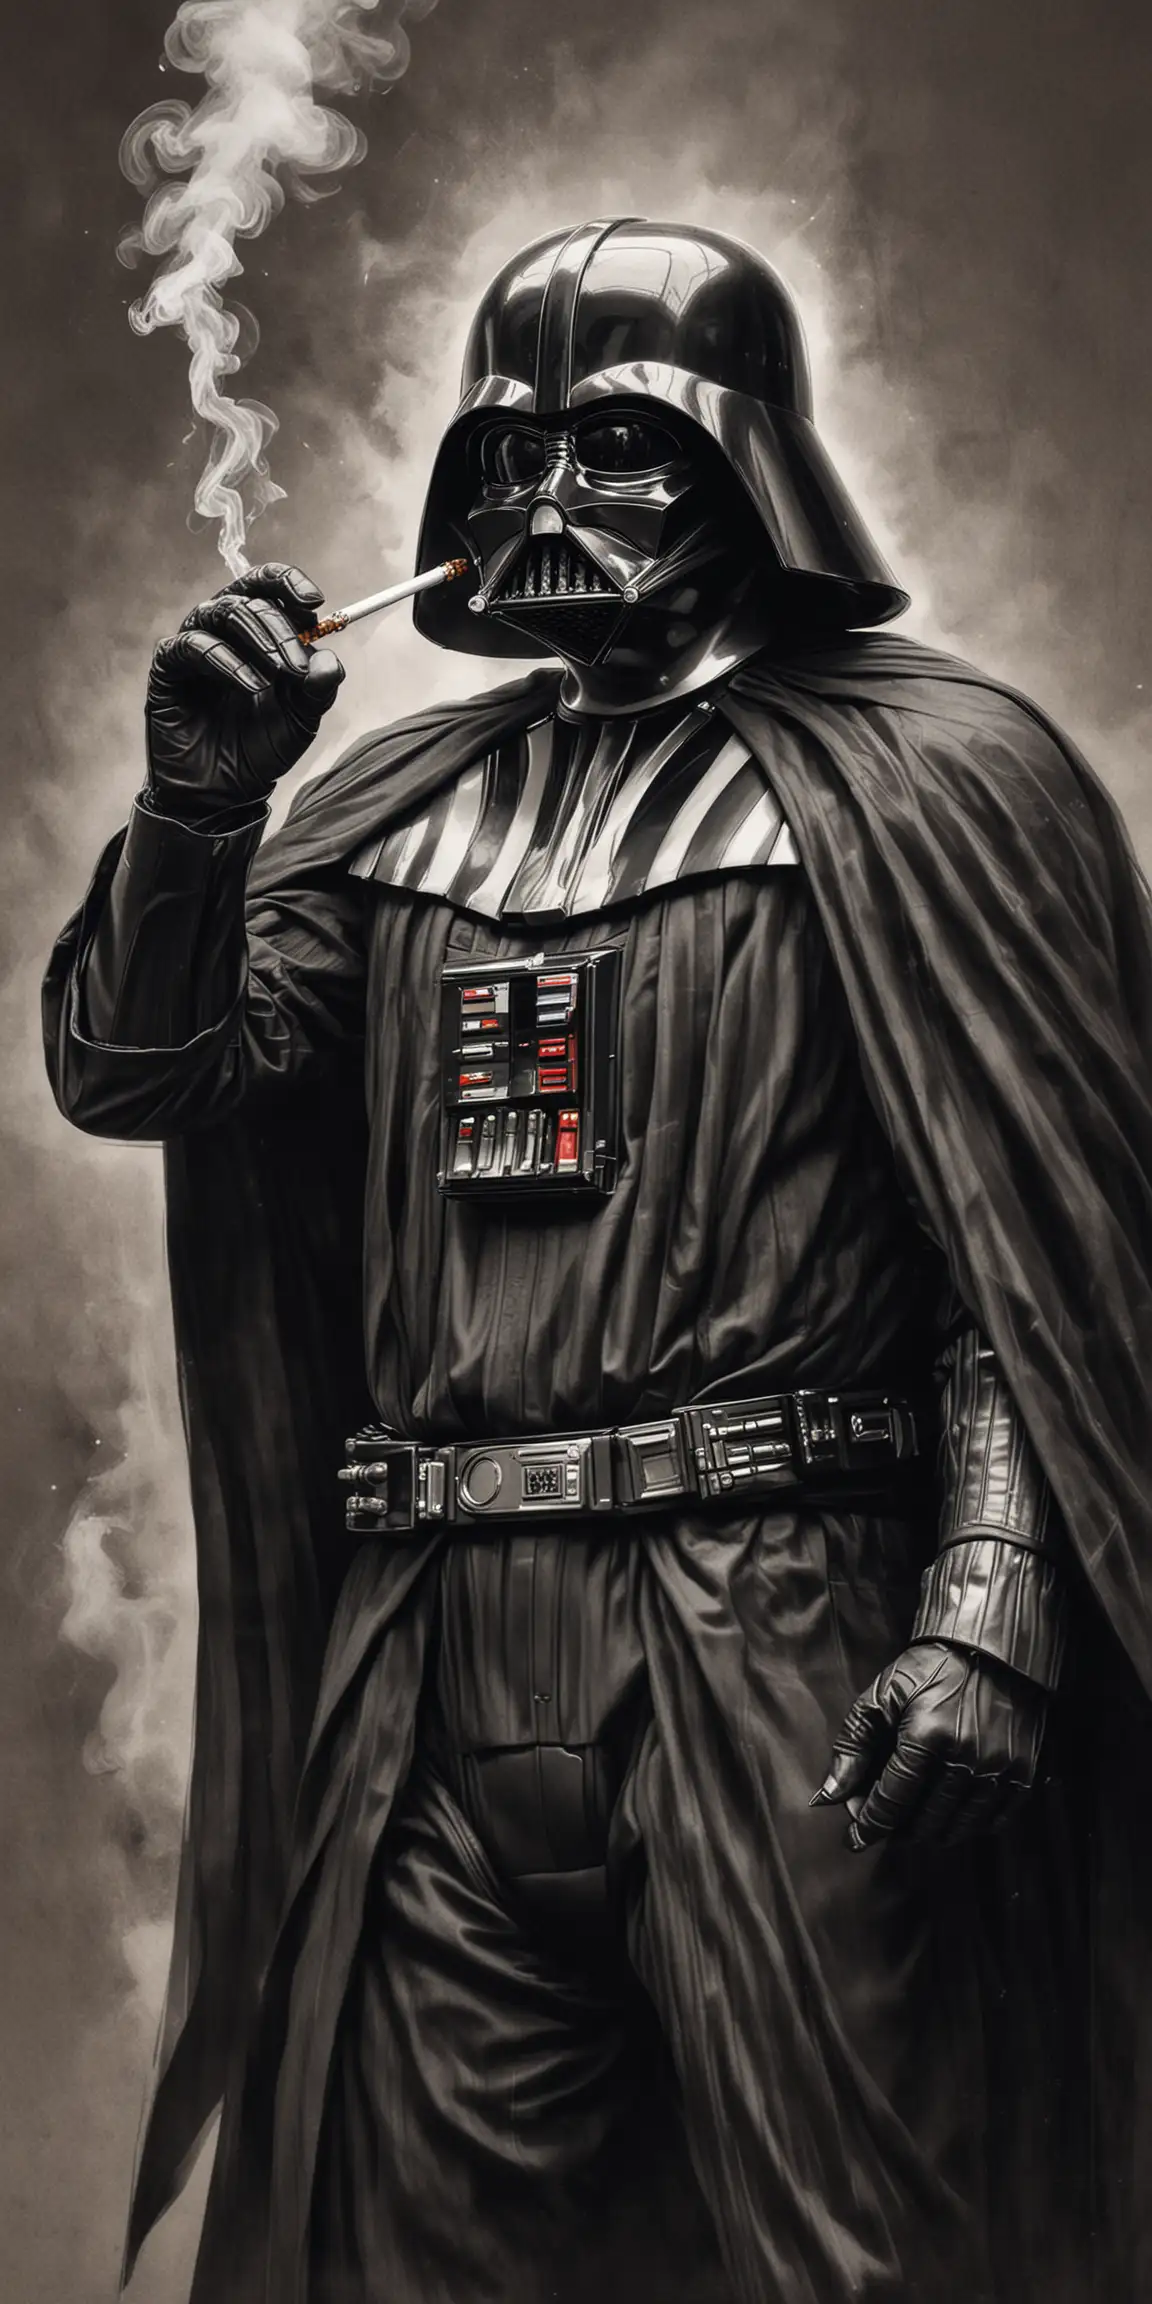 Dancing Darth Vader Smoking a Cigarette Galactic Sith Groove and Relaxed Swagger